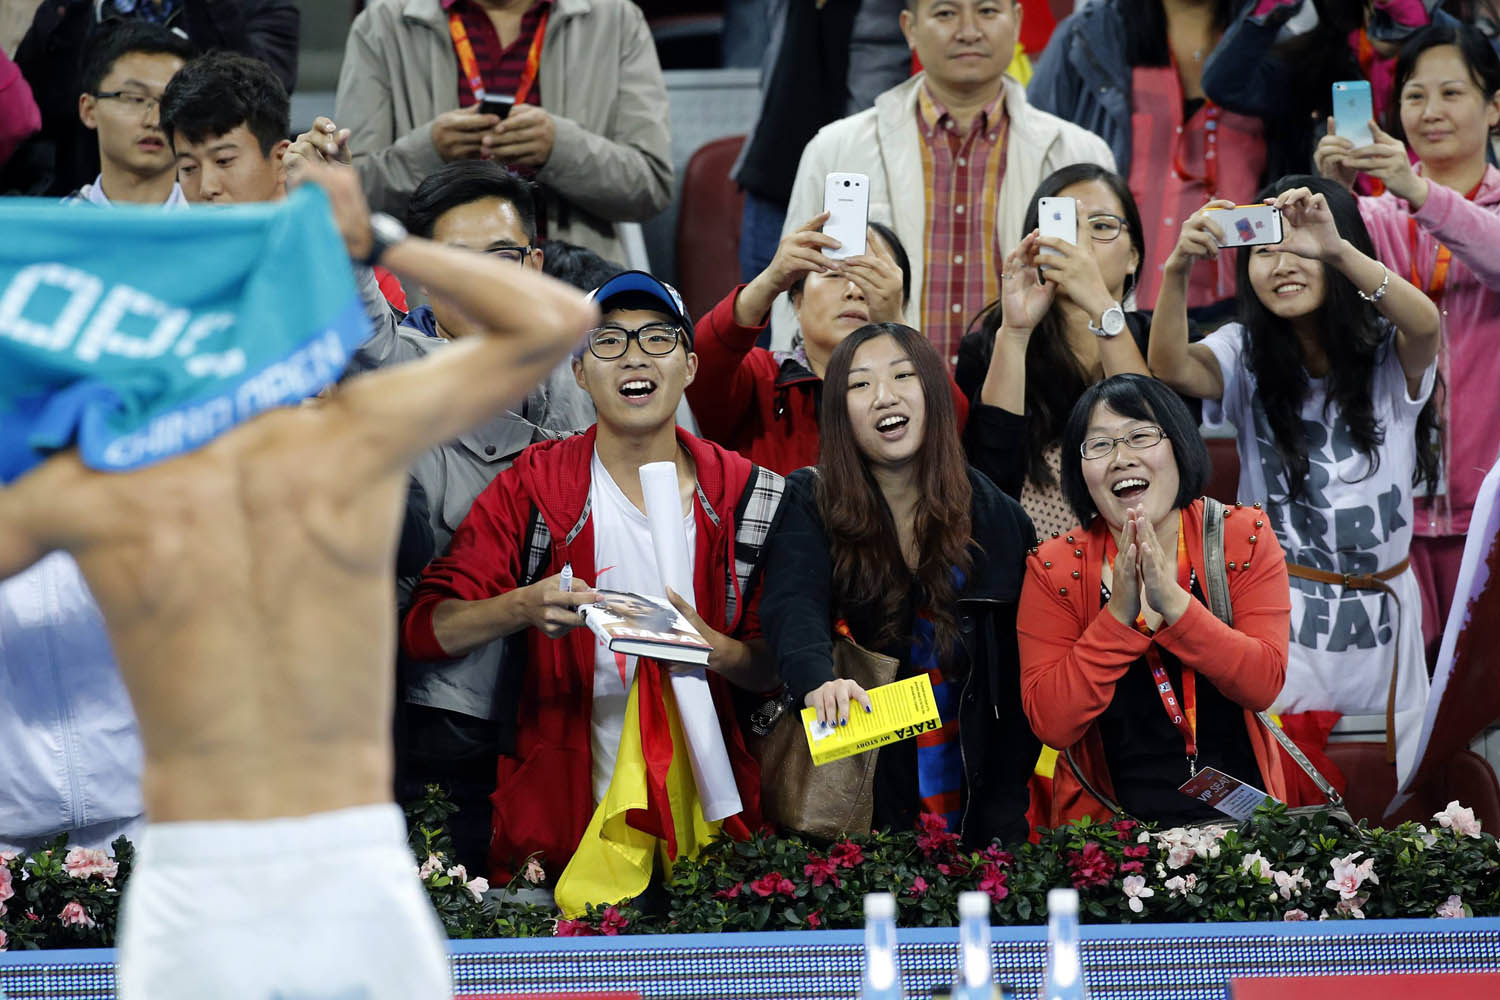 Fans watch Spain's Rafael Nadal change his shirt after he defeated Philipp Kohlschreiber of Germany in their match at the China Open tennis tournament in Beijing